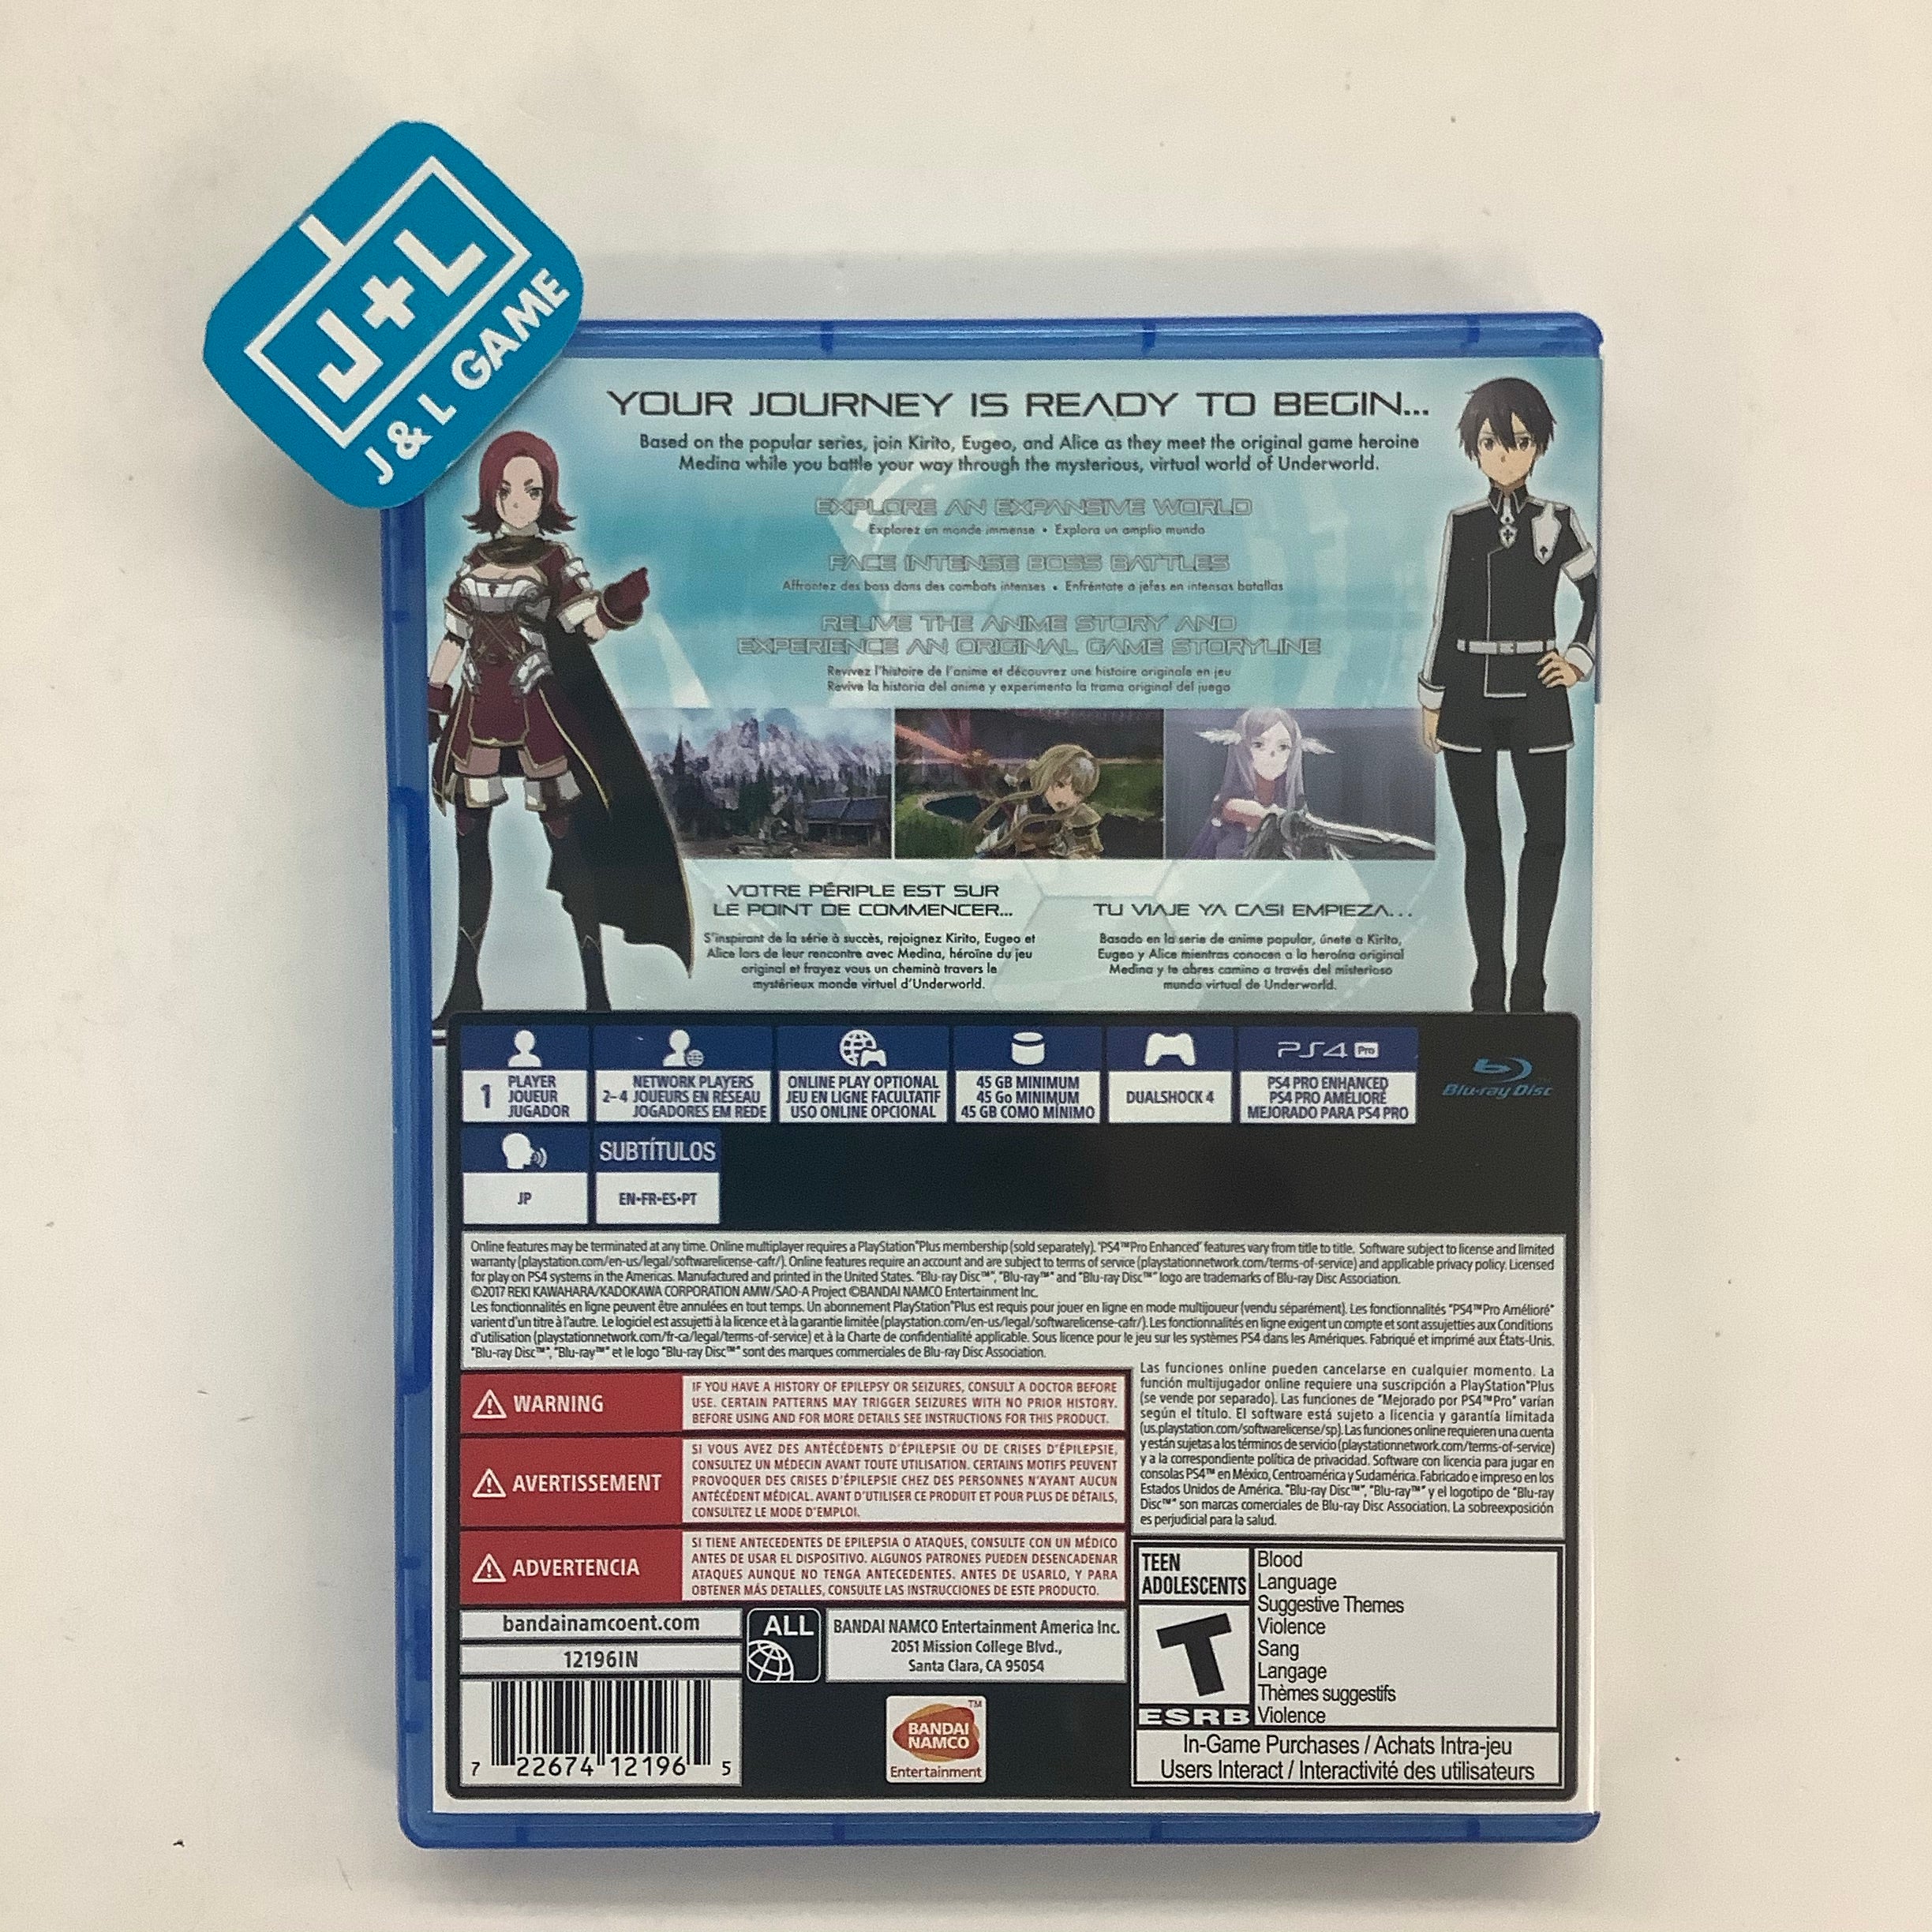 SWORD ART ONLINE: Alicization Lycoris - (PS4) PlayStation 4 [Pre-Owned] Video Games Bandai   